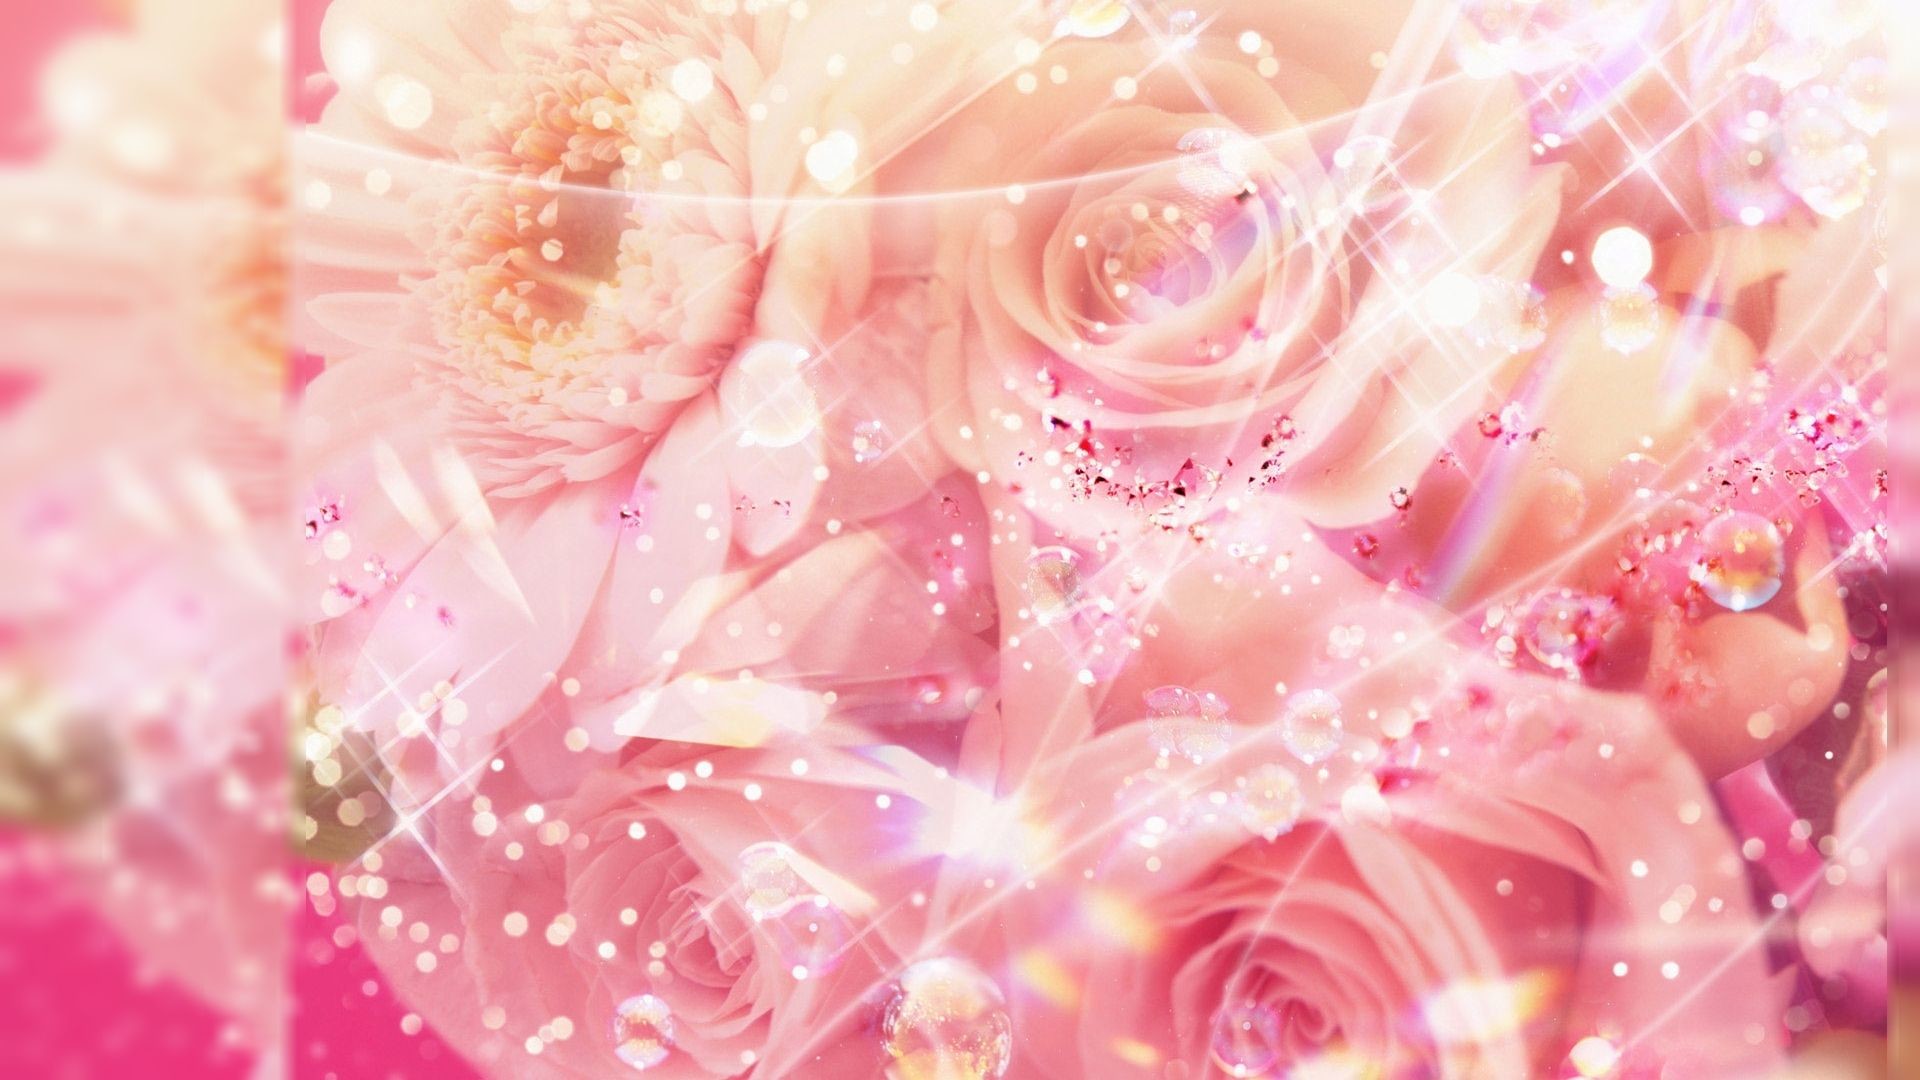 1920x1080 10. girly wallpapers tumblr10